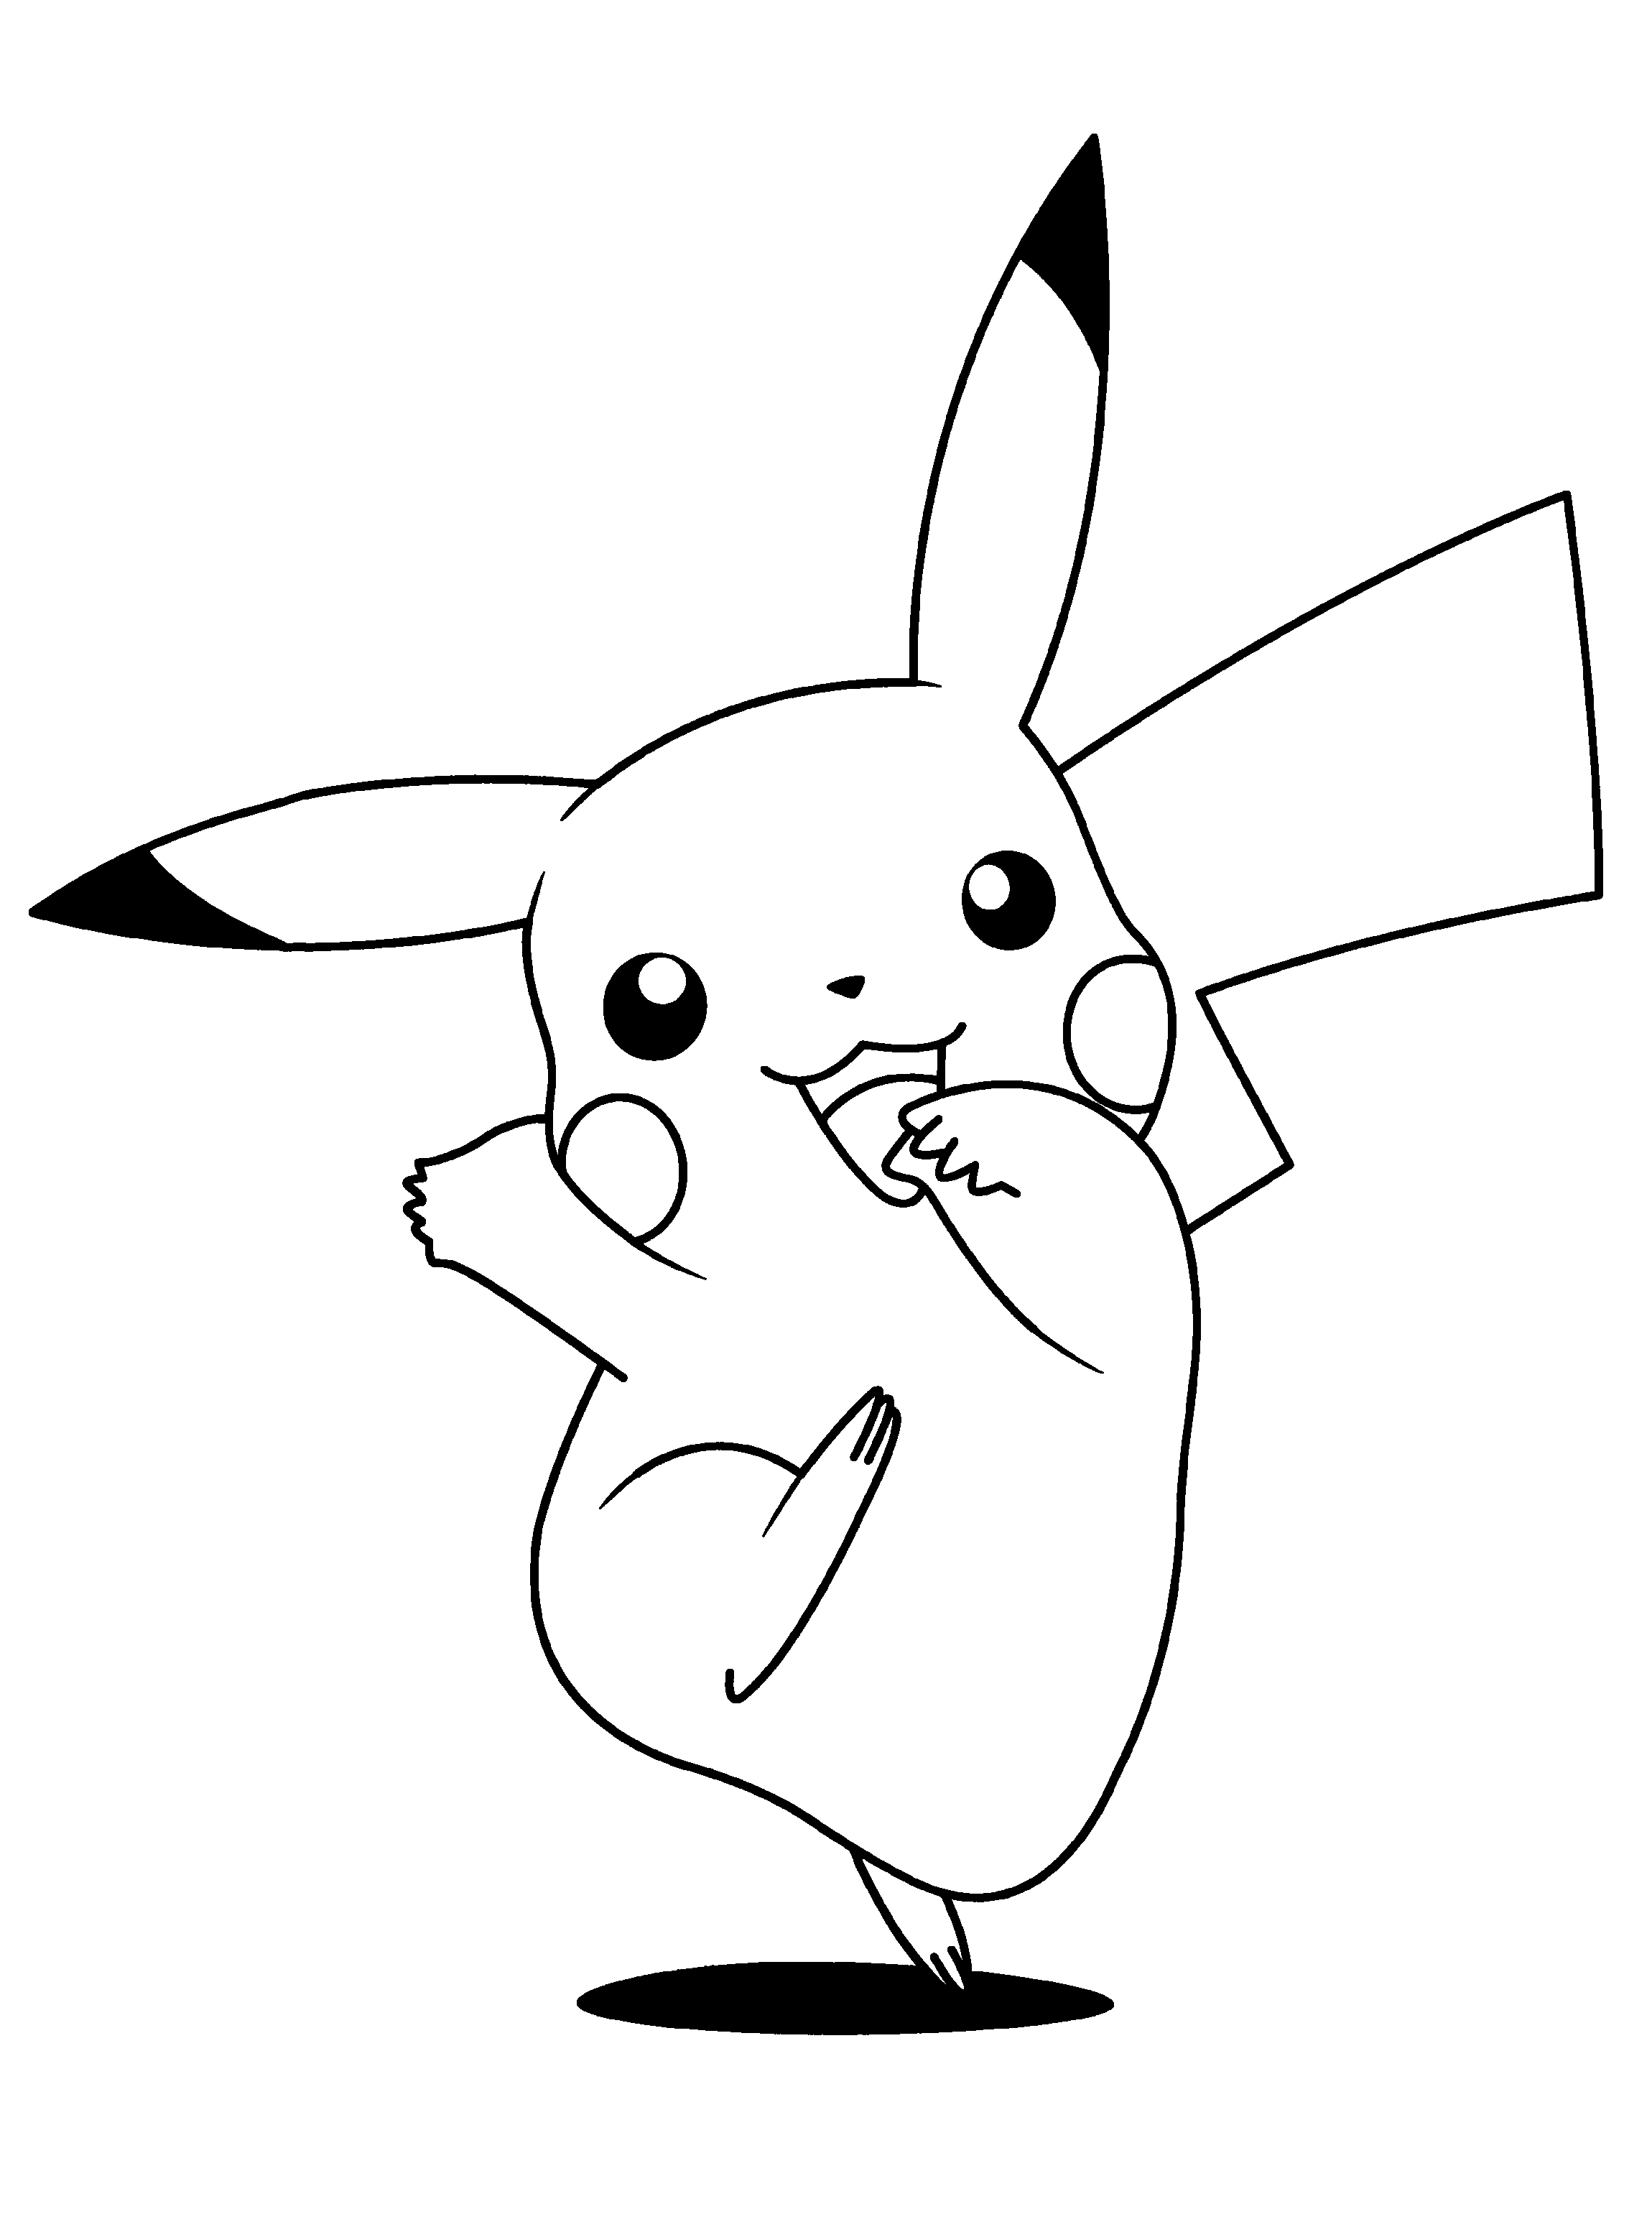 Pokemon for children   All Pokemon coloring pages Kids Coloring Pages